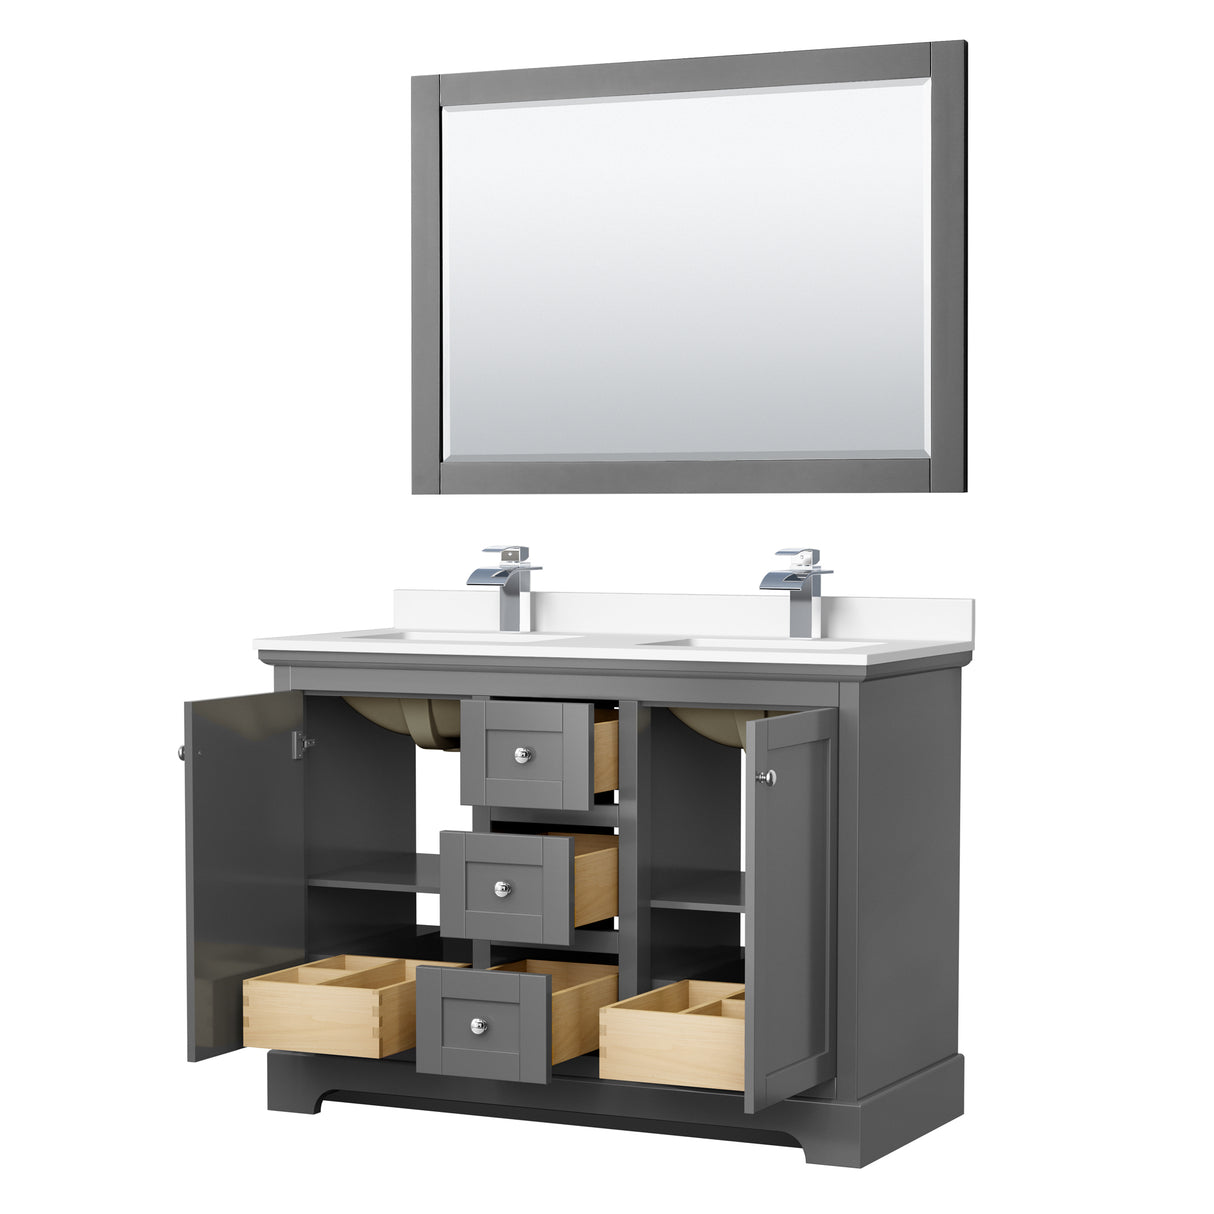 Avery 48 Inch Double Bathroom Vanity in Dark Gray White Cultured Marble Countertop Undermount Square Sinks 46 Inch Mirror